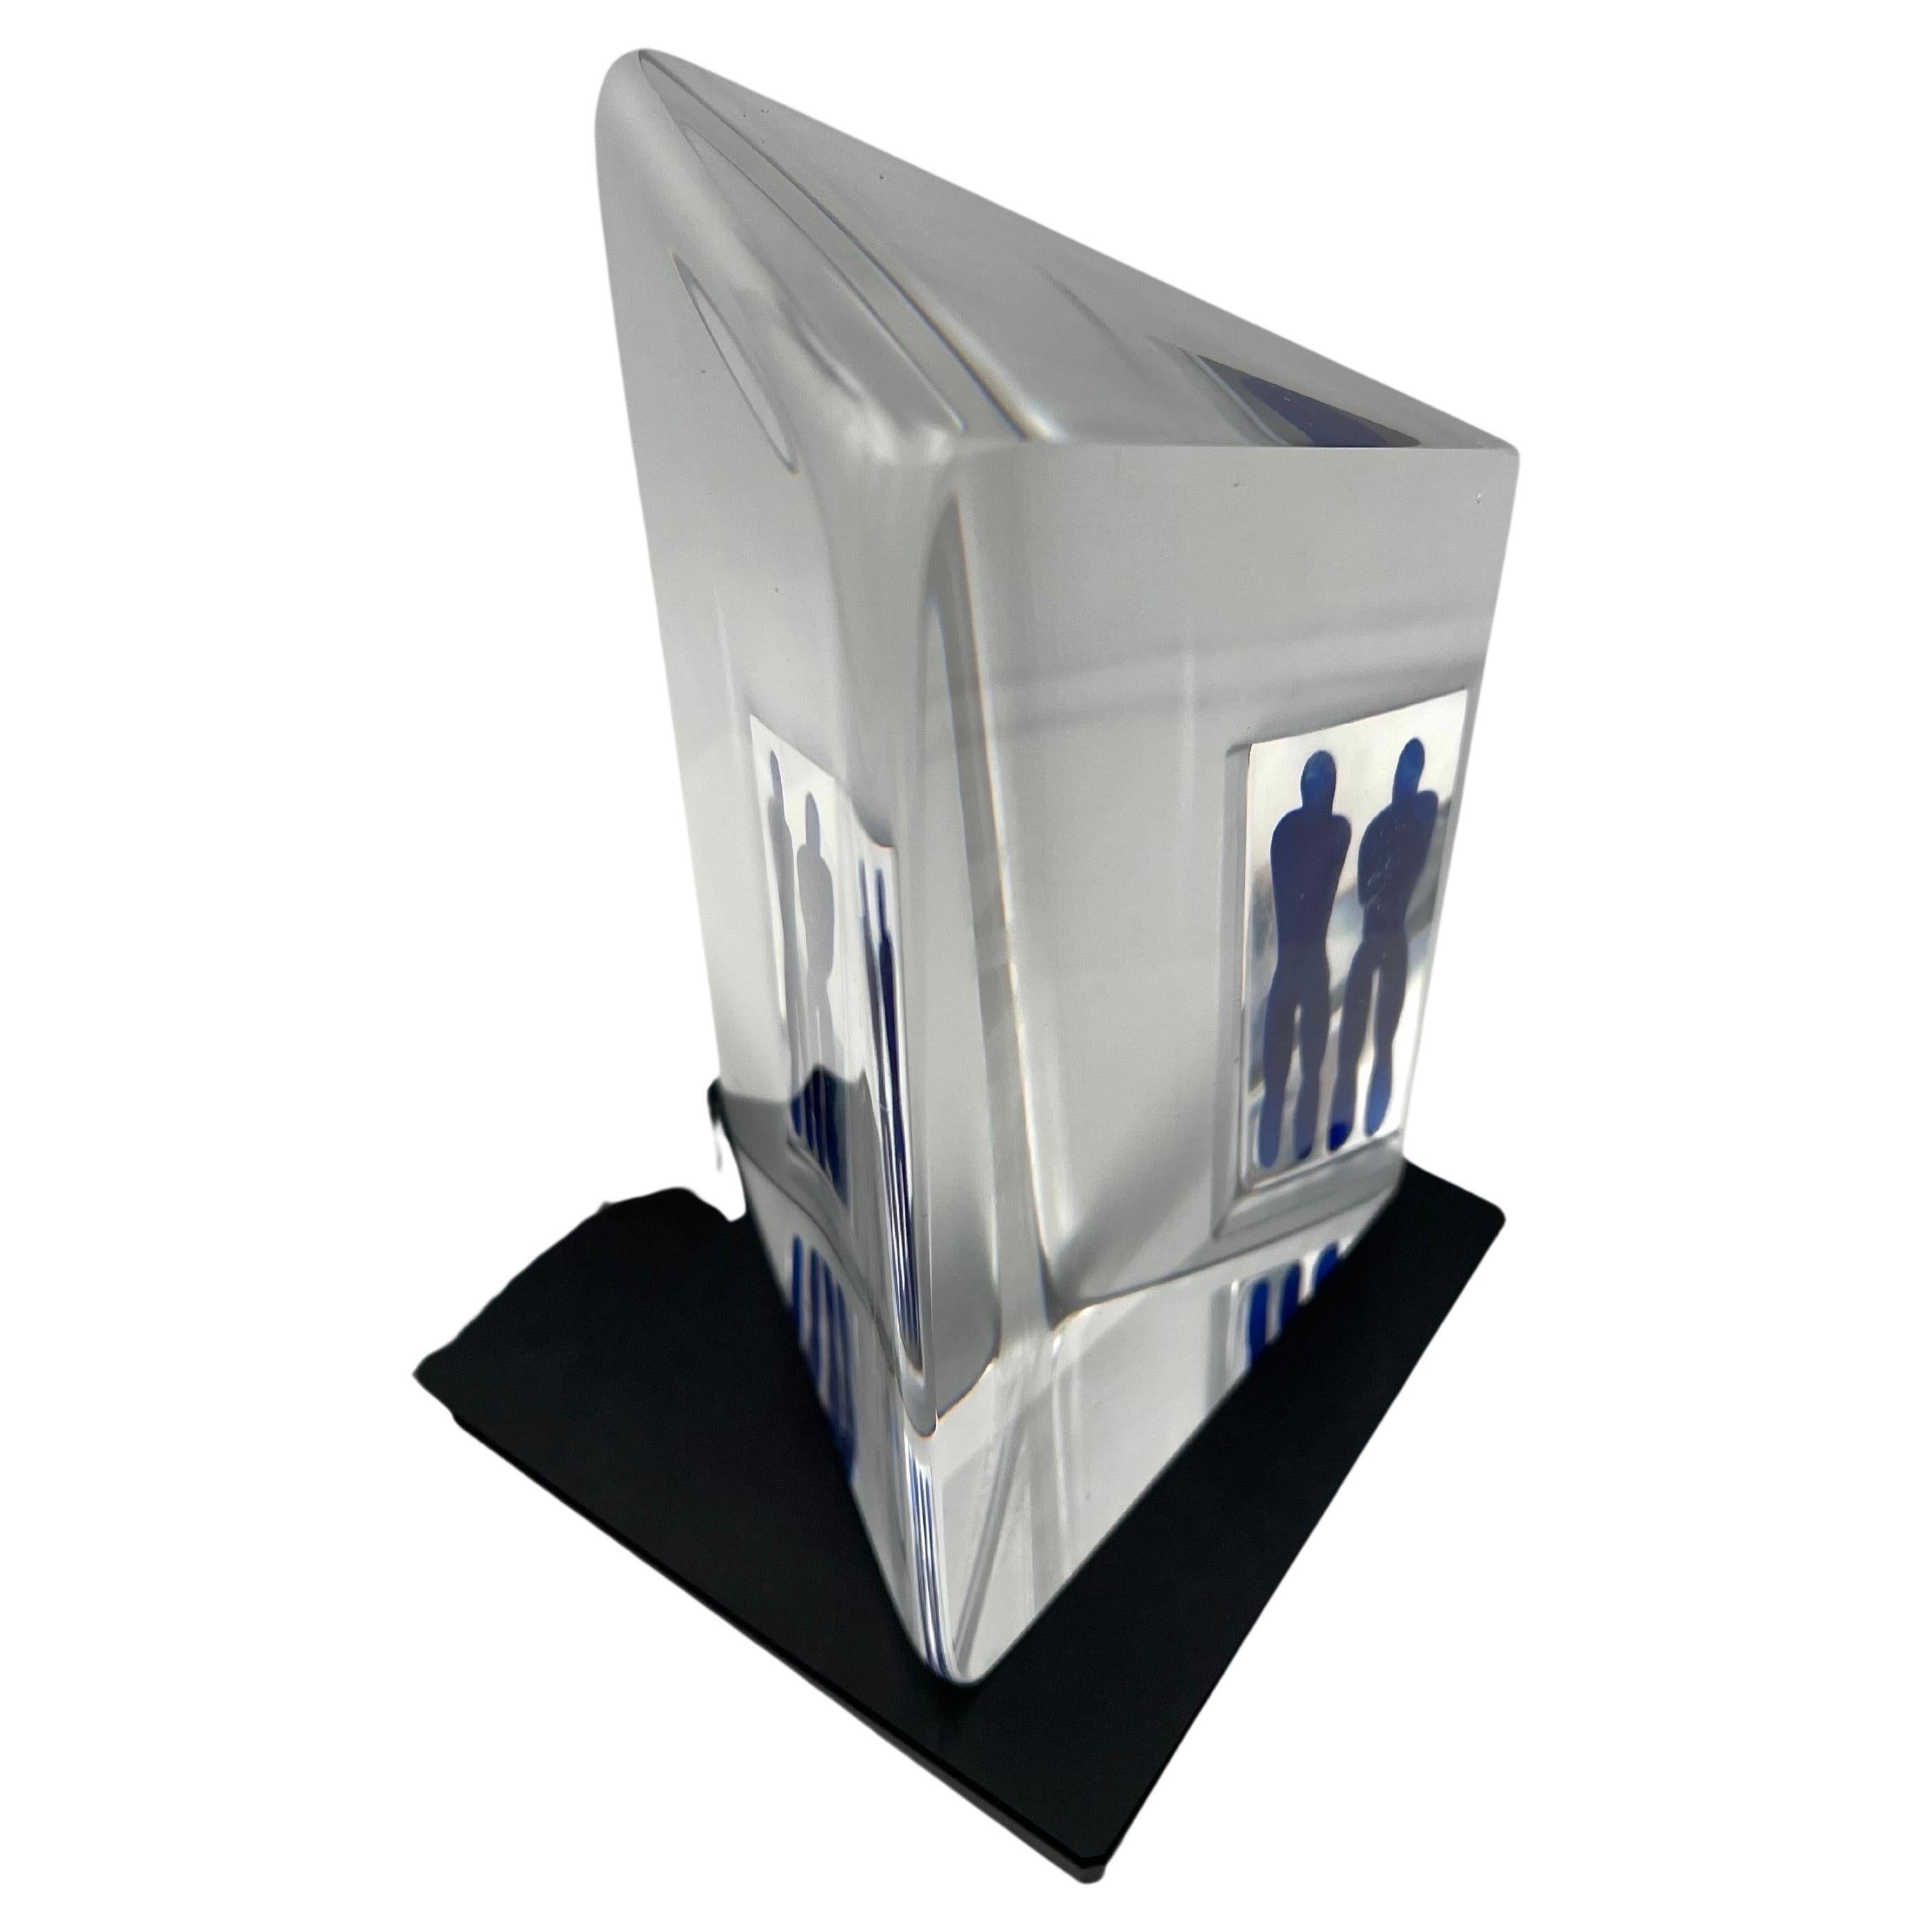 Amazing glass block tridimensional sculpture signed, by Bertil Vallien, excellent condition signed at the bottom sitting on a black plastic block.